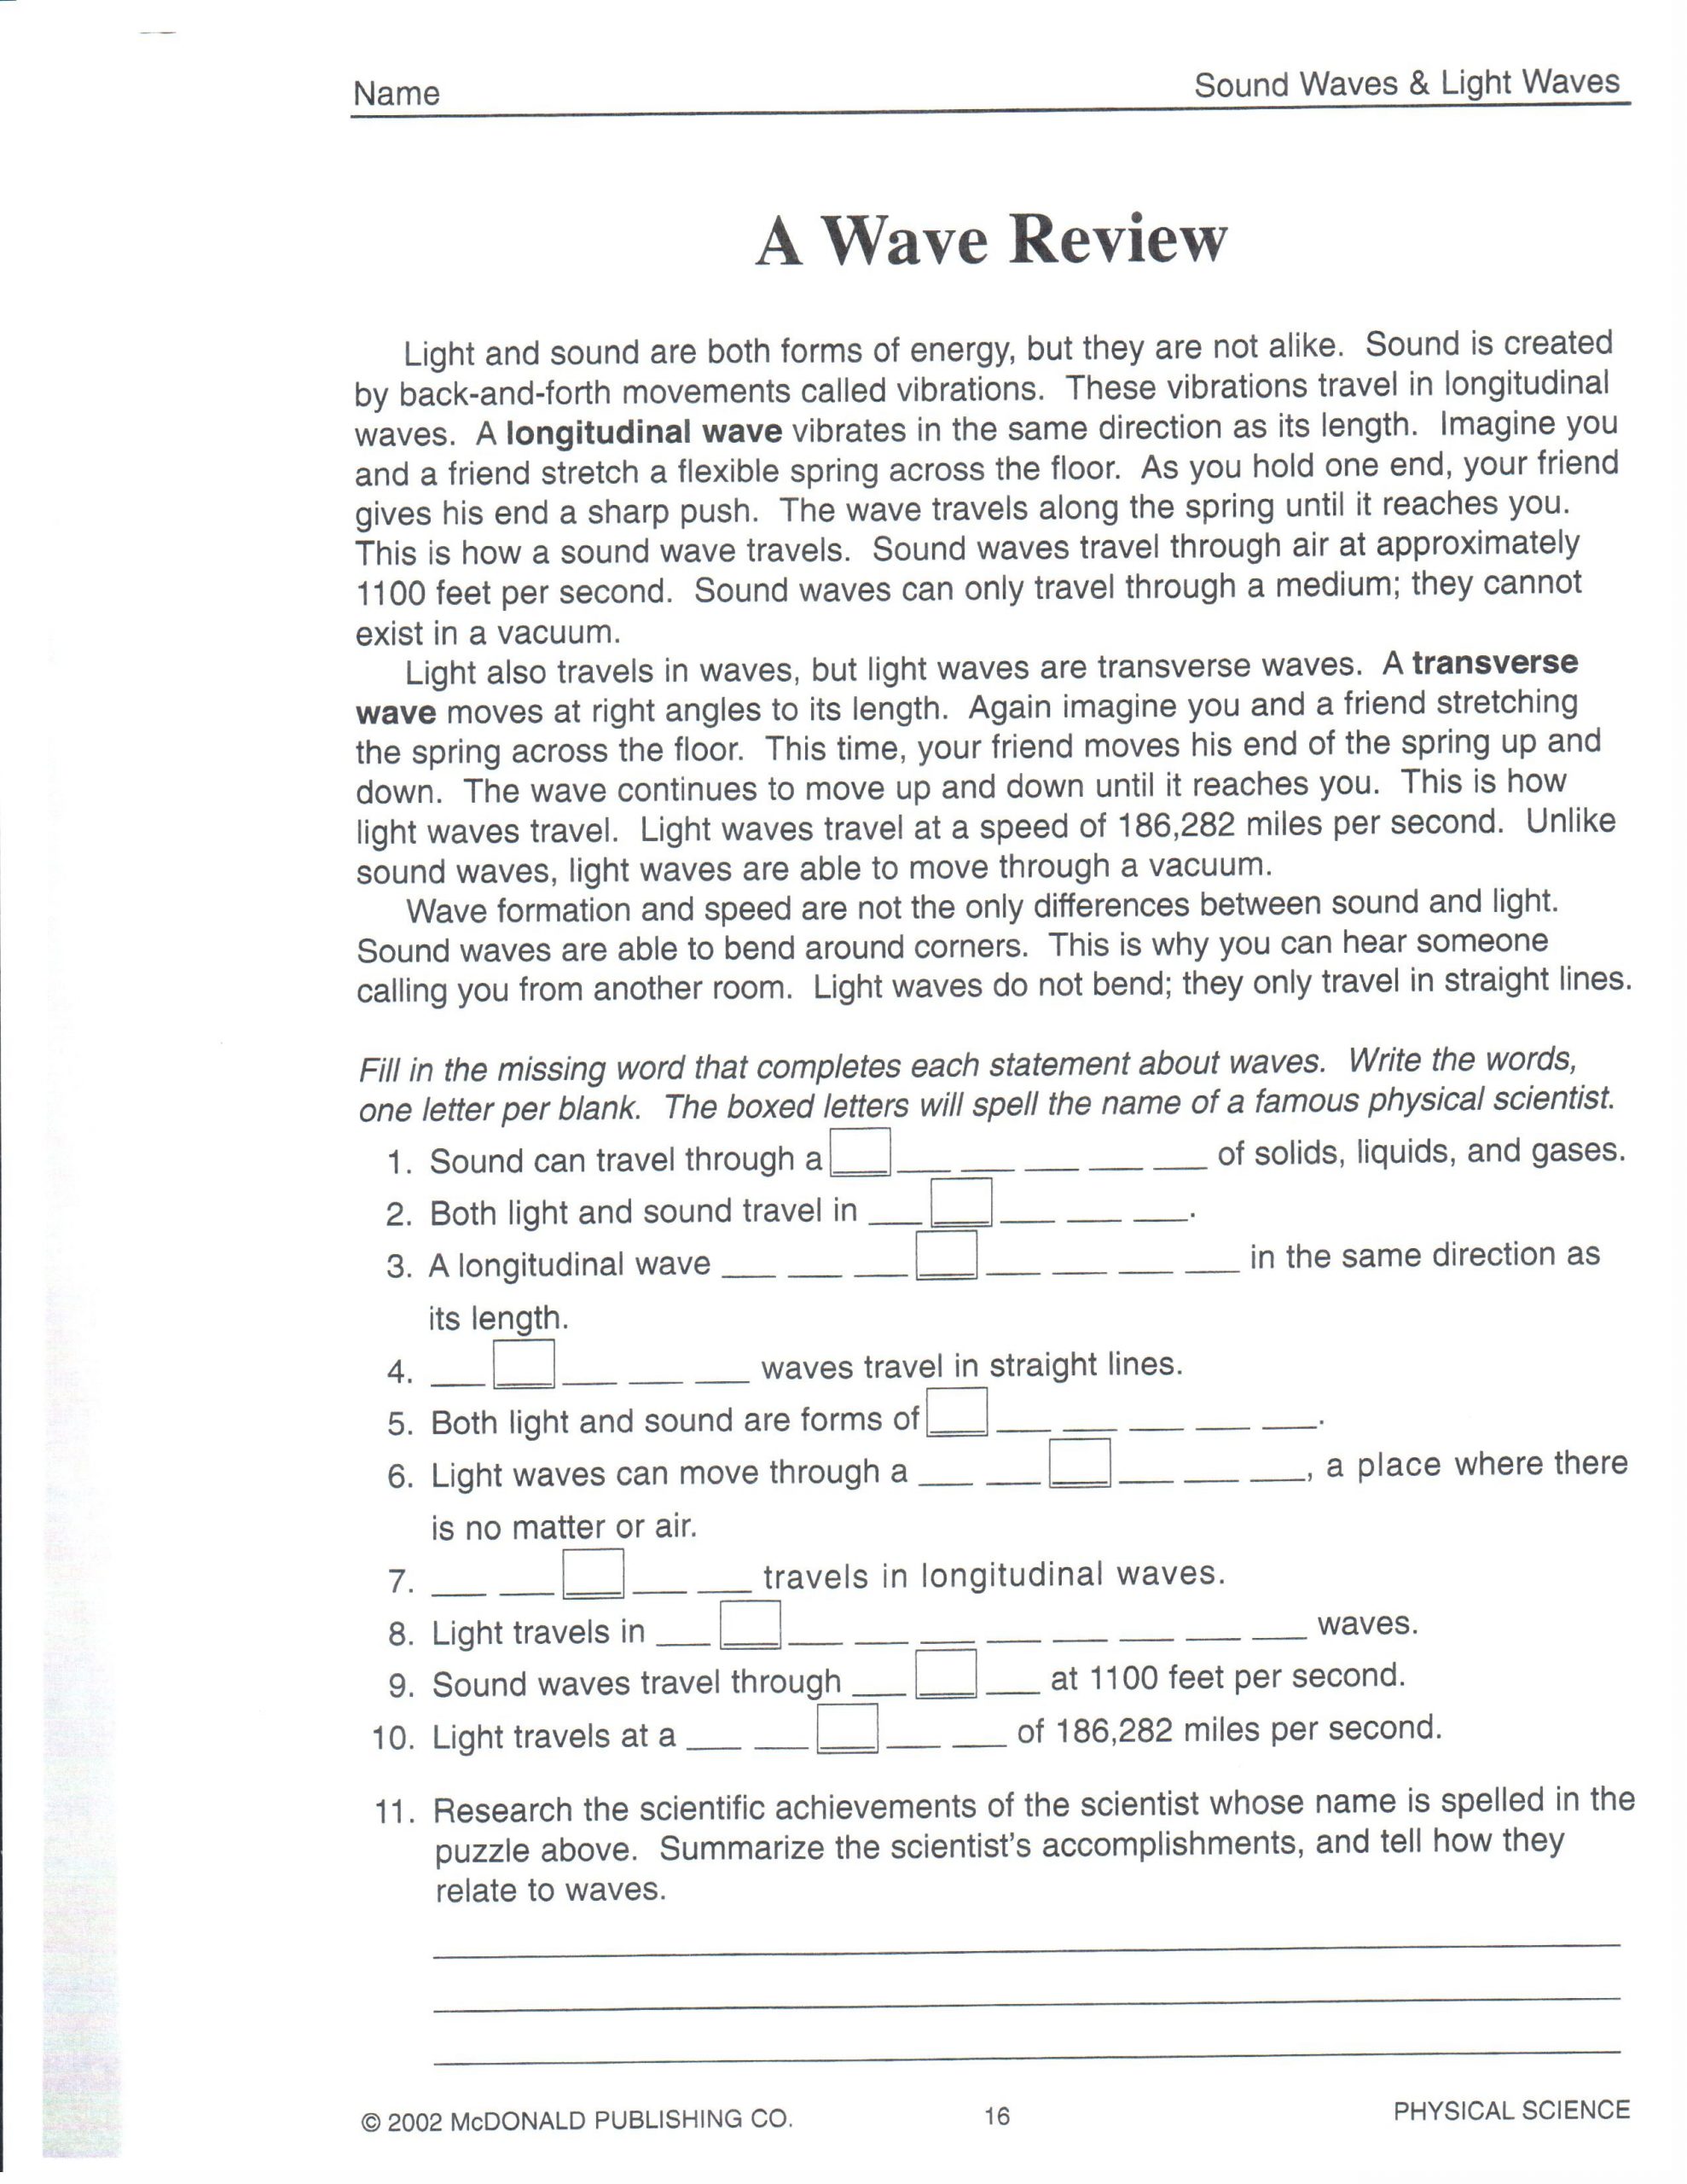 Wave Review Worksheet Answer Key Physical Science March 2013